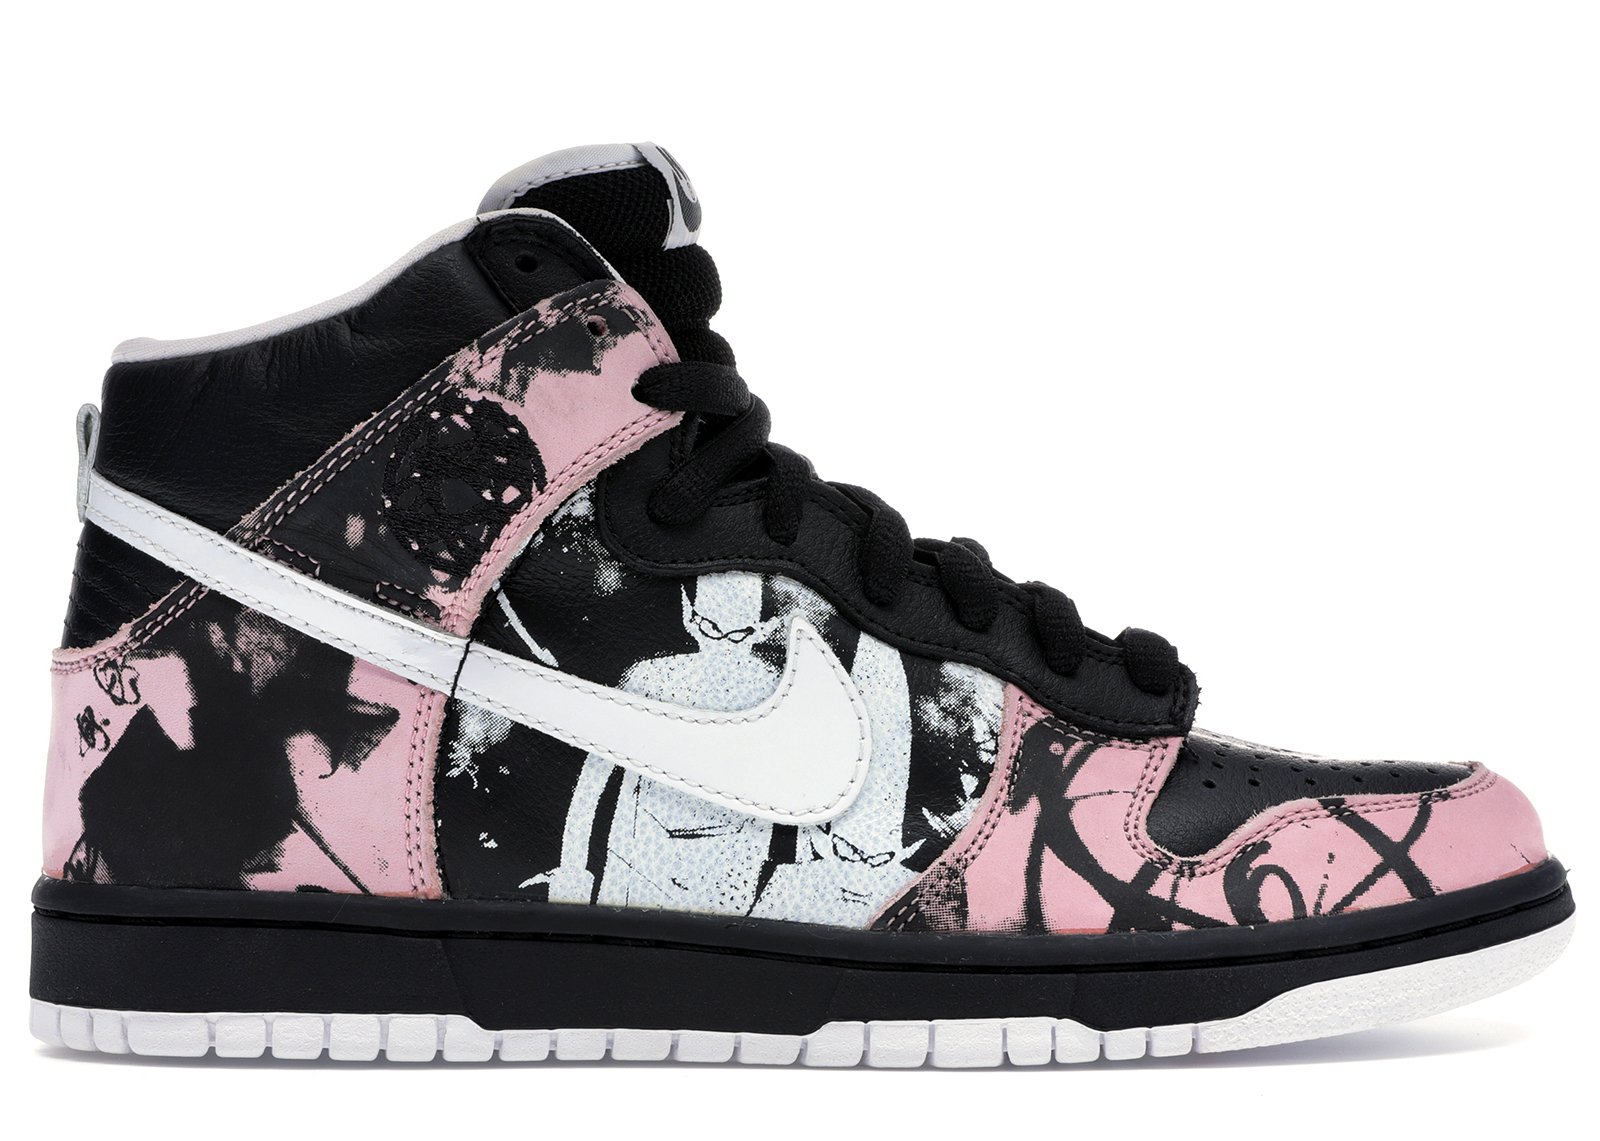 Nike Dunk High Pro SB Unkle sneakers